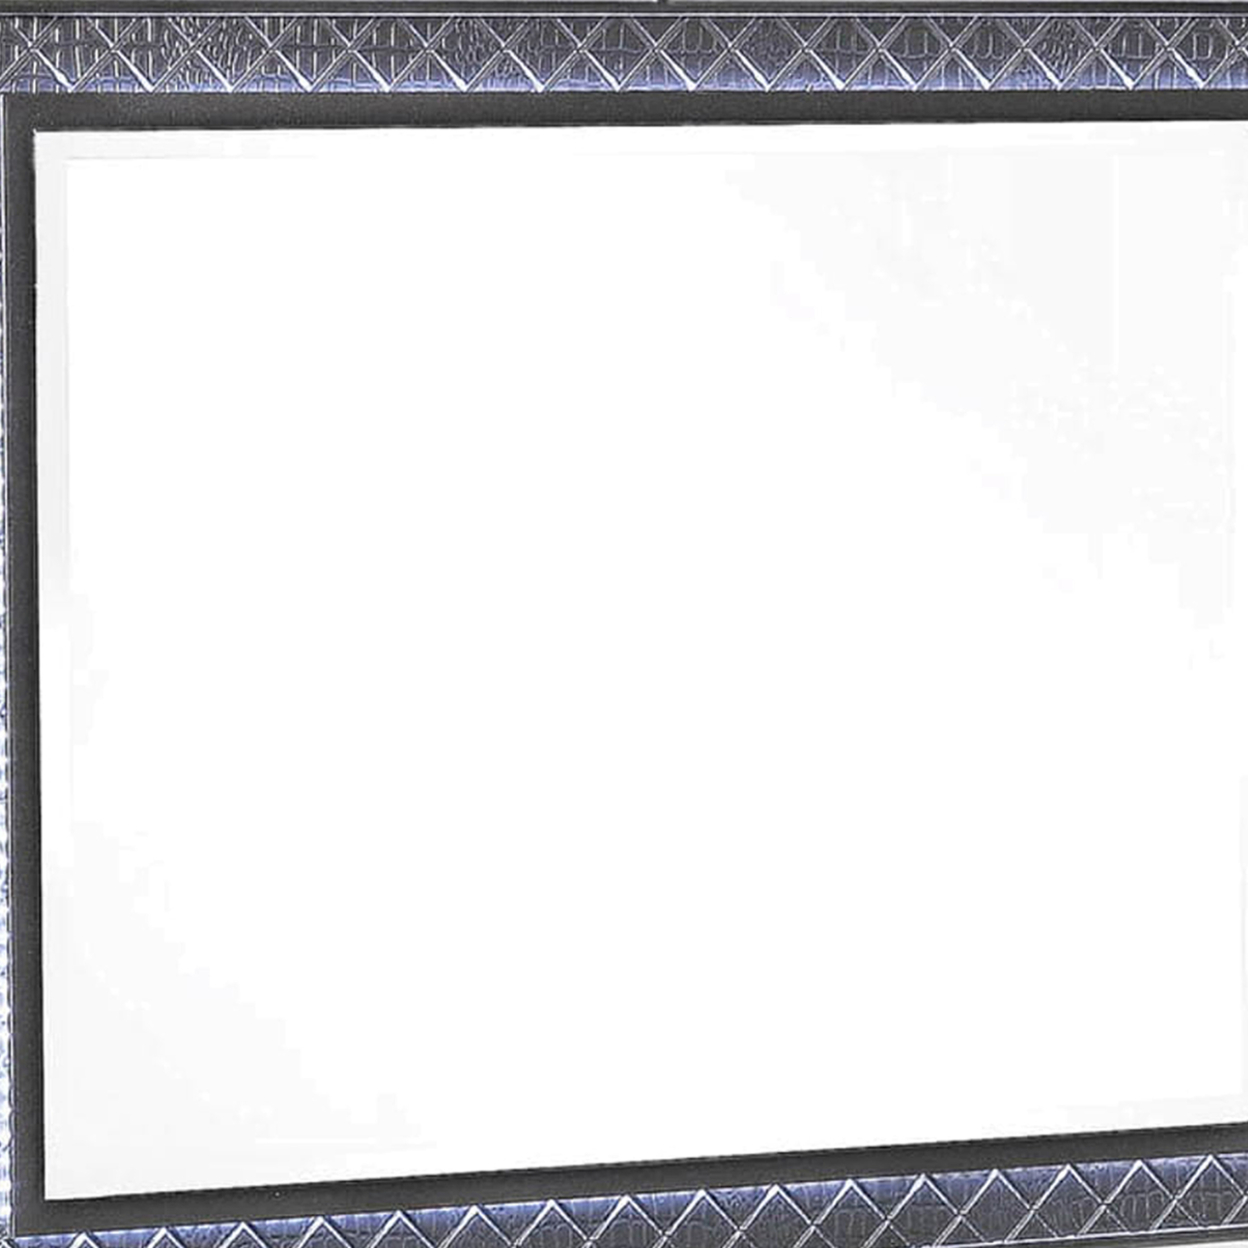 LED Trim Wooden Frame Mirror With Diamond Pattern, Gray And Silver- Saltoro Sherpi